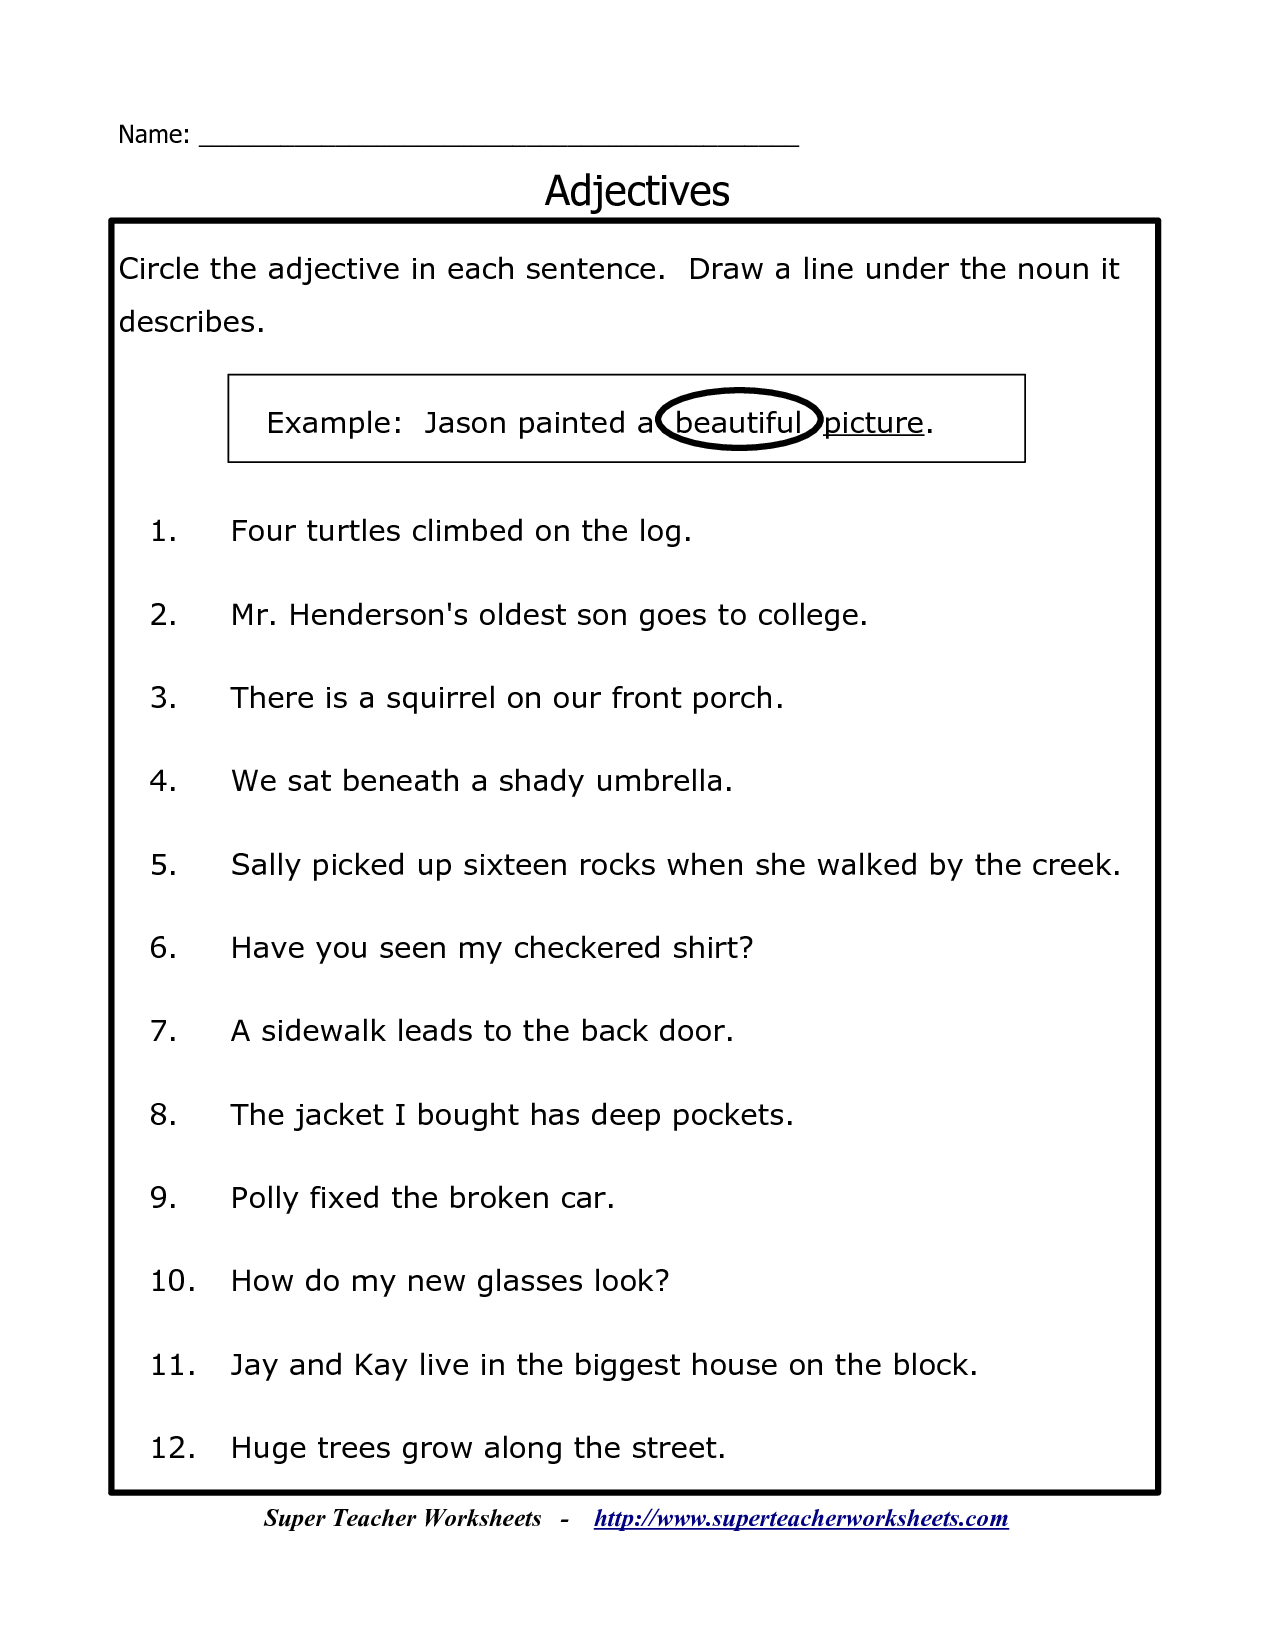 15-best-images-of-adjective-worksheets-for-high-school-adverb-and-adjective-worksheet-middle